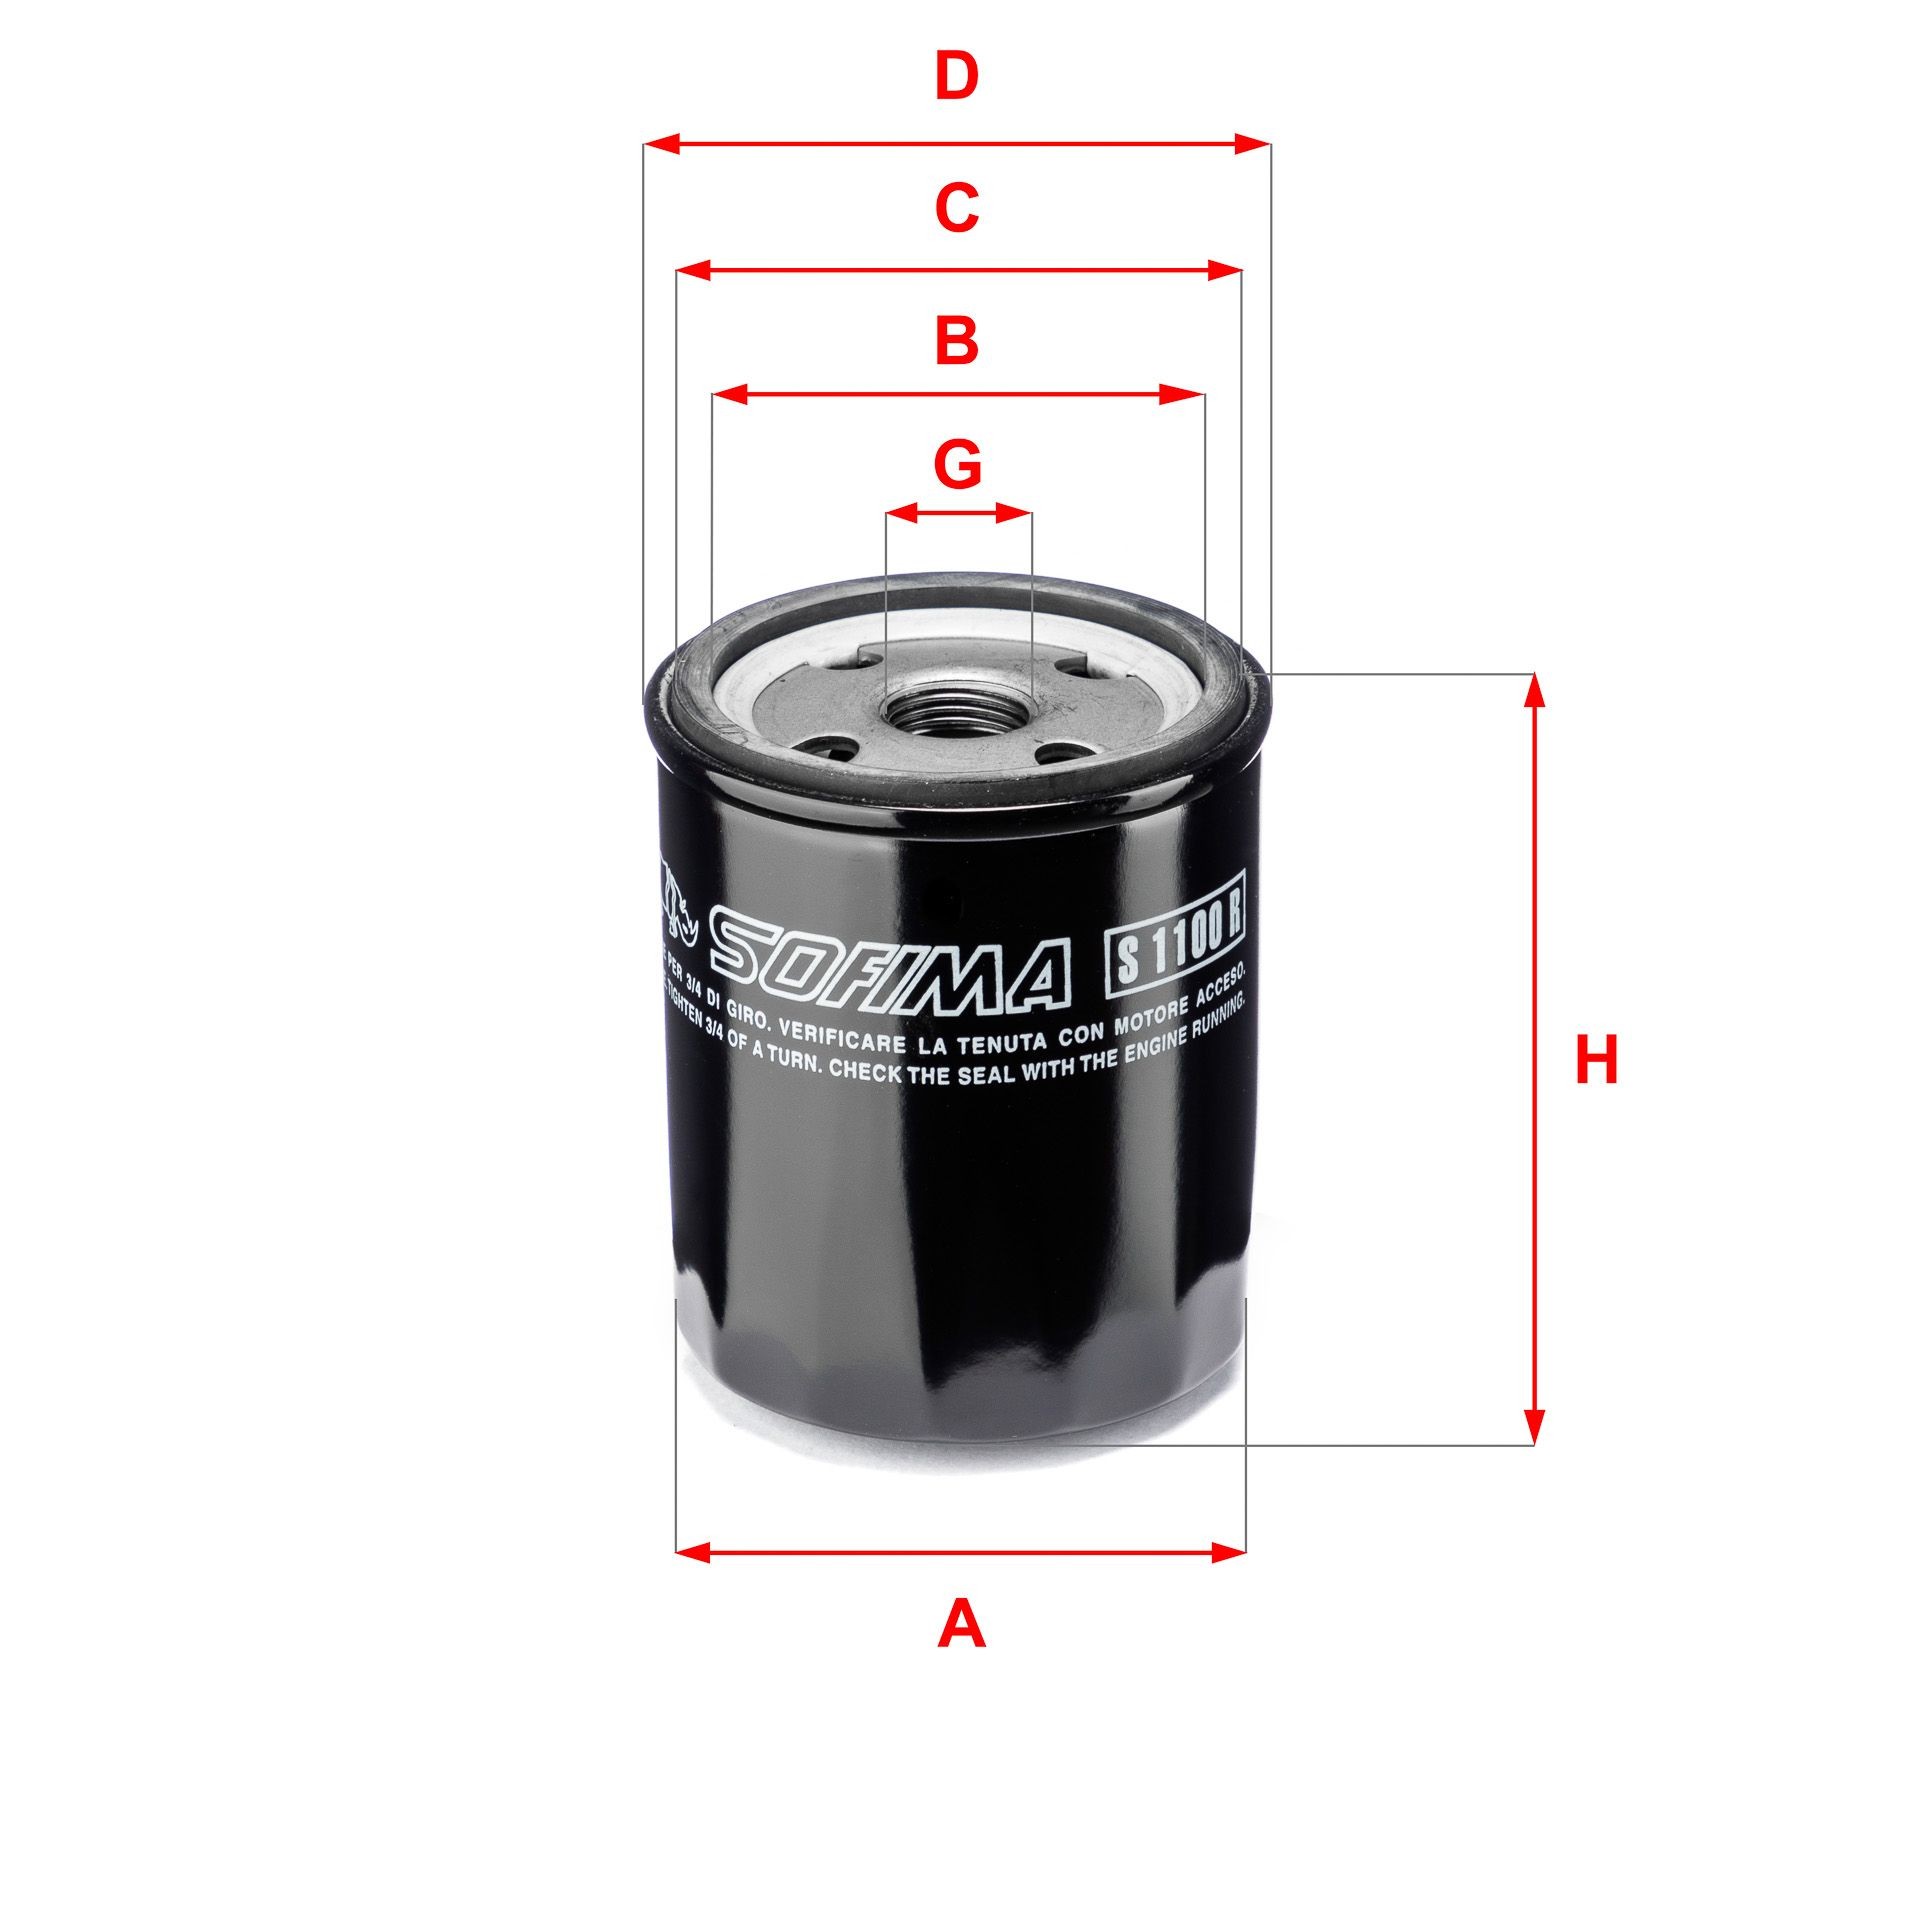 SOFIMA S 1100 R Oil filter 3/4-16 UNF, Spin-on Filter